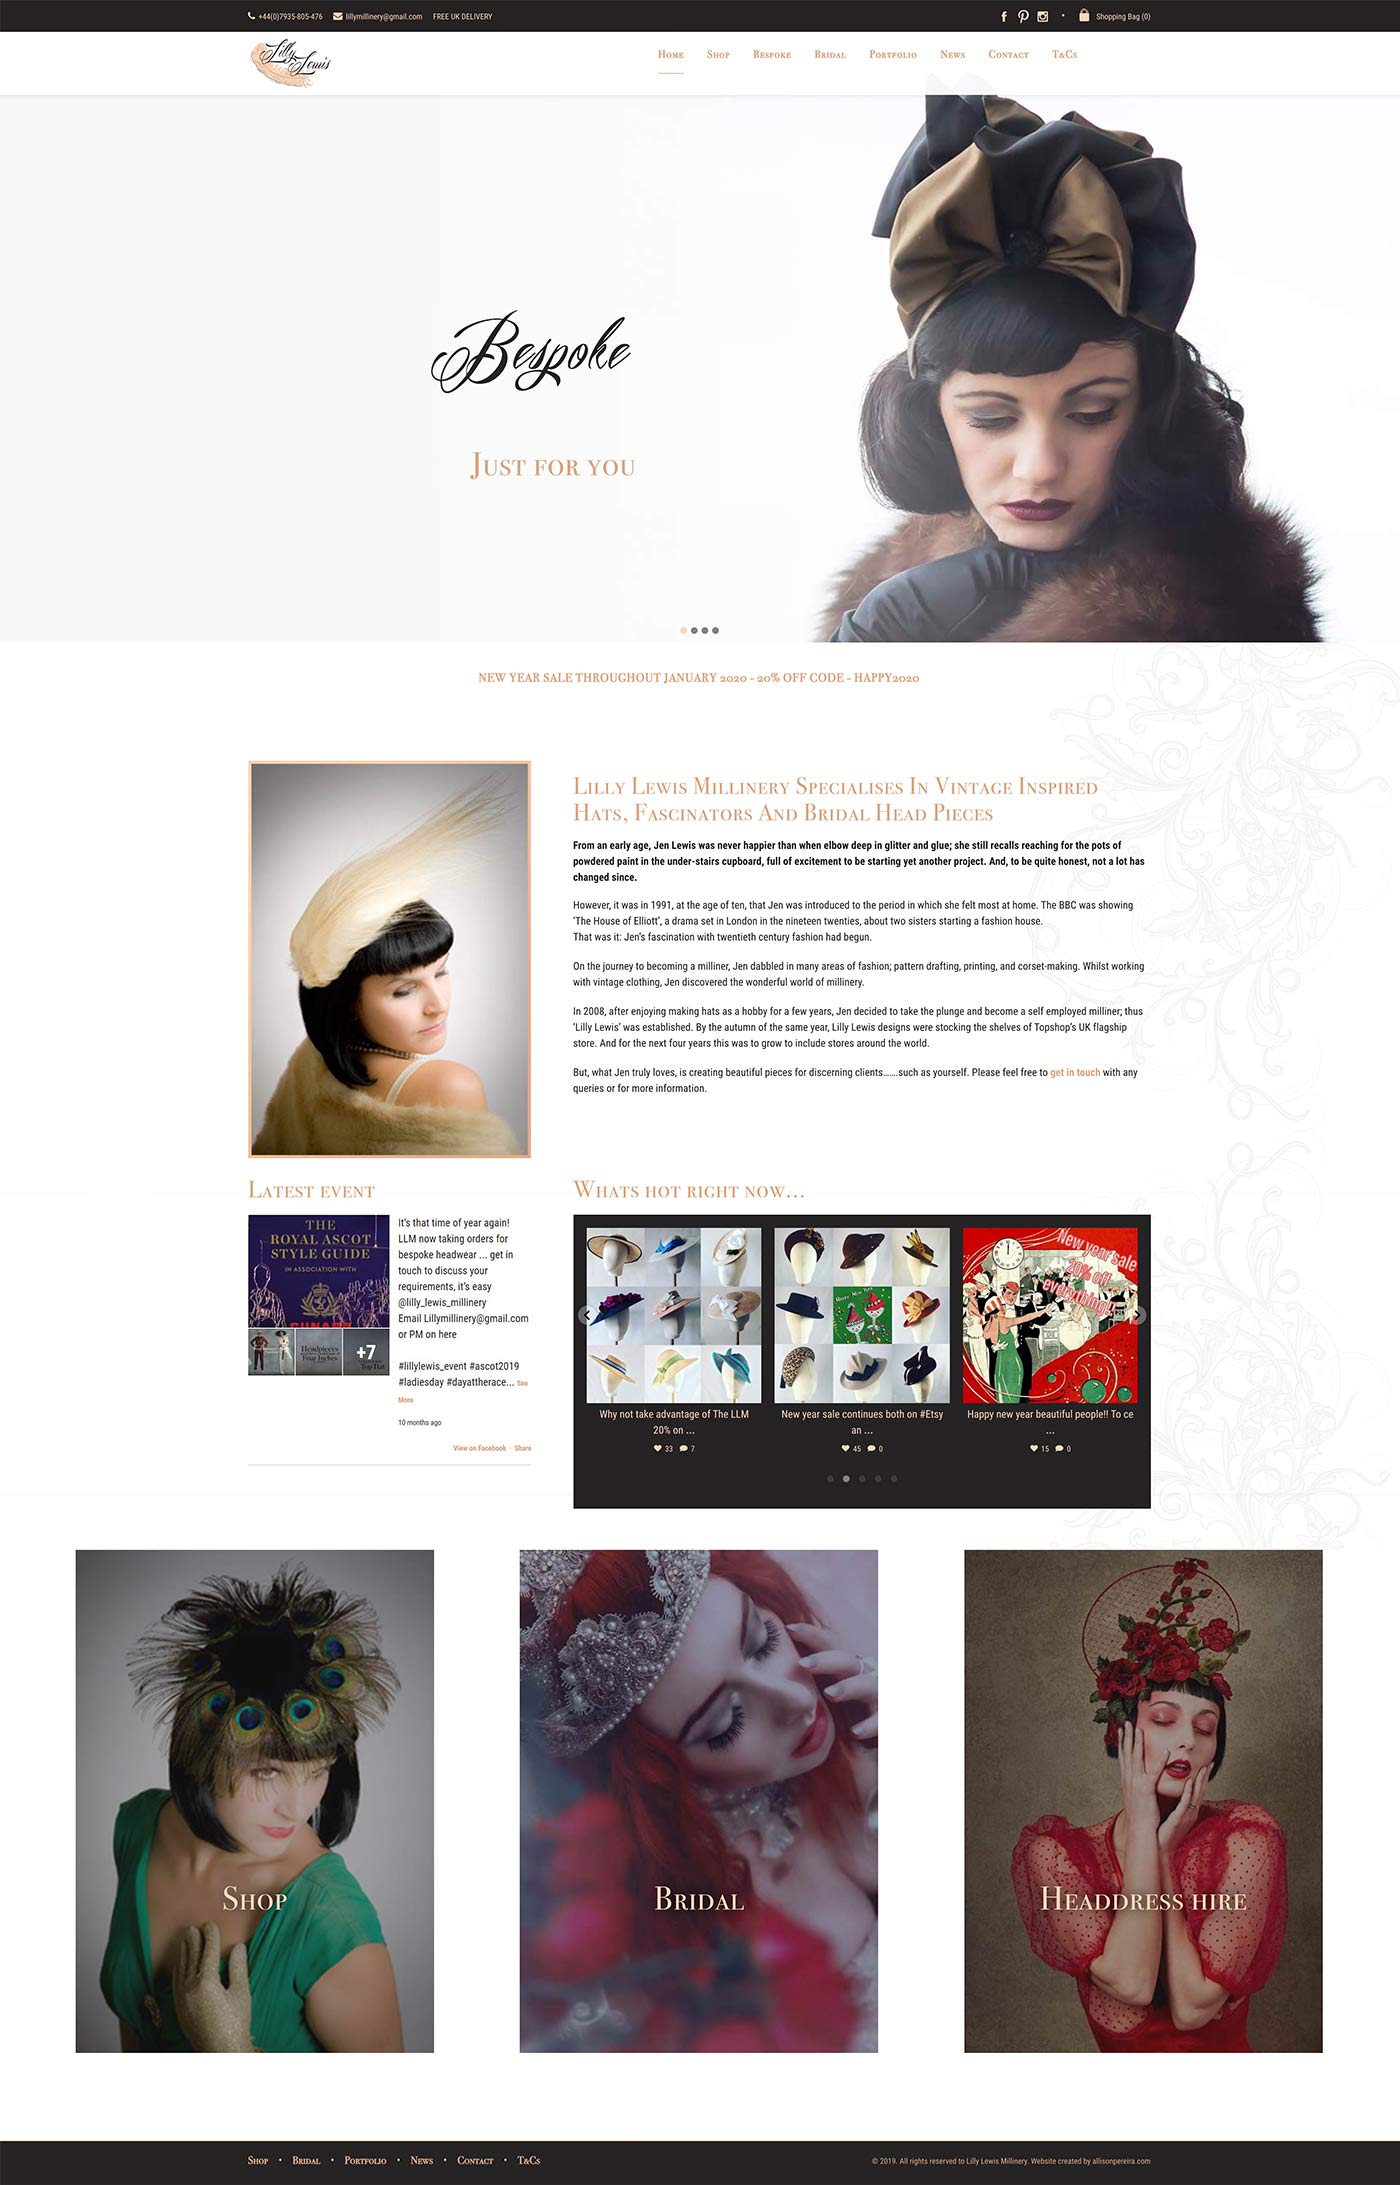 Lilly Lewis Millinery project work web page